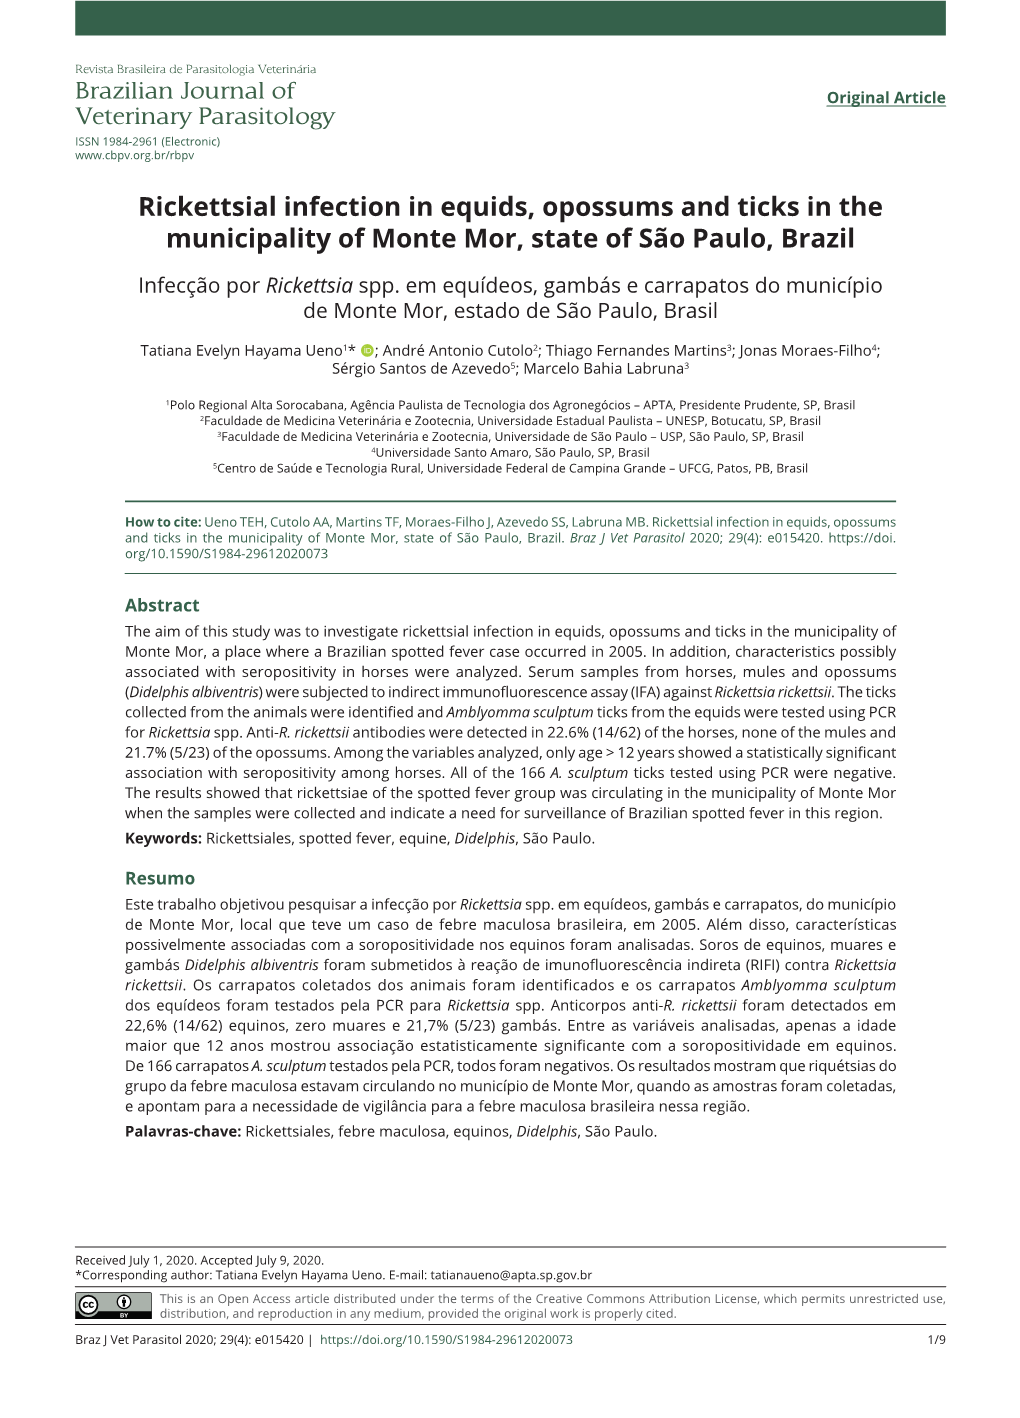 Rickettsial Infection in Equids, Opossums and Ticks in the Municipality of Monte Mor, State of São Paulo, Brazil